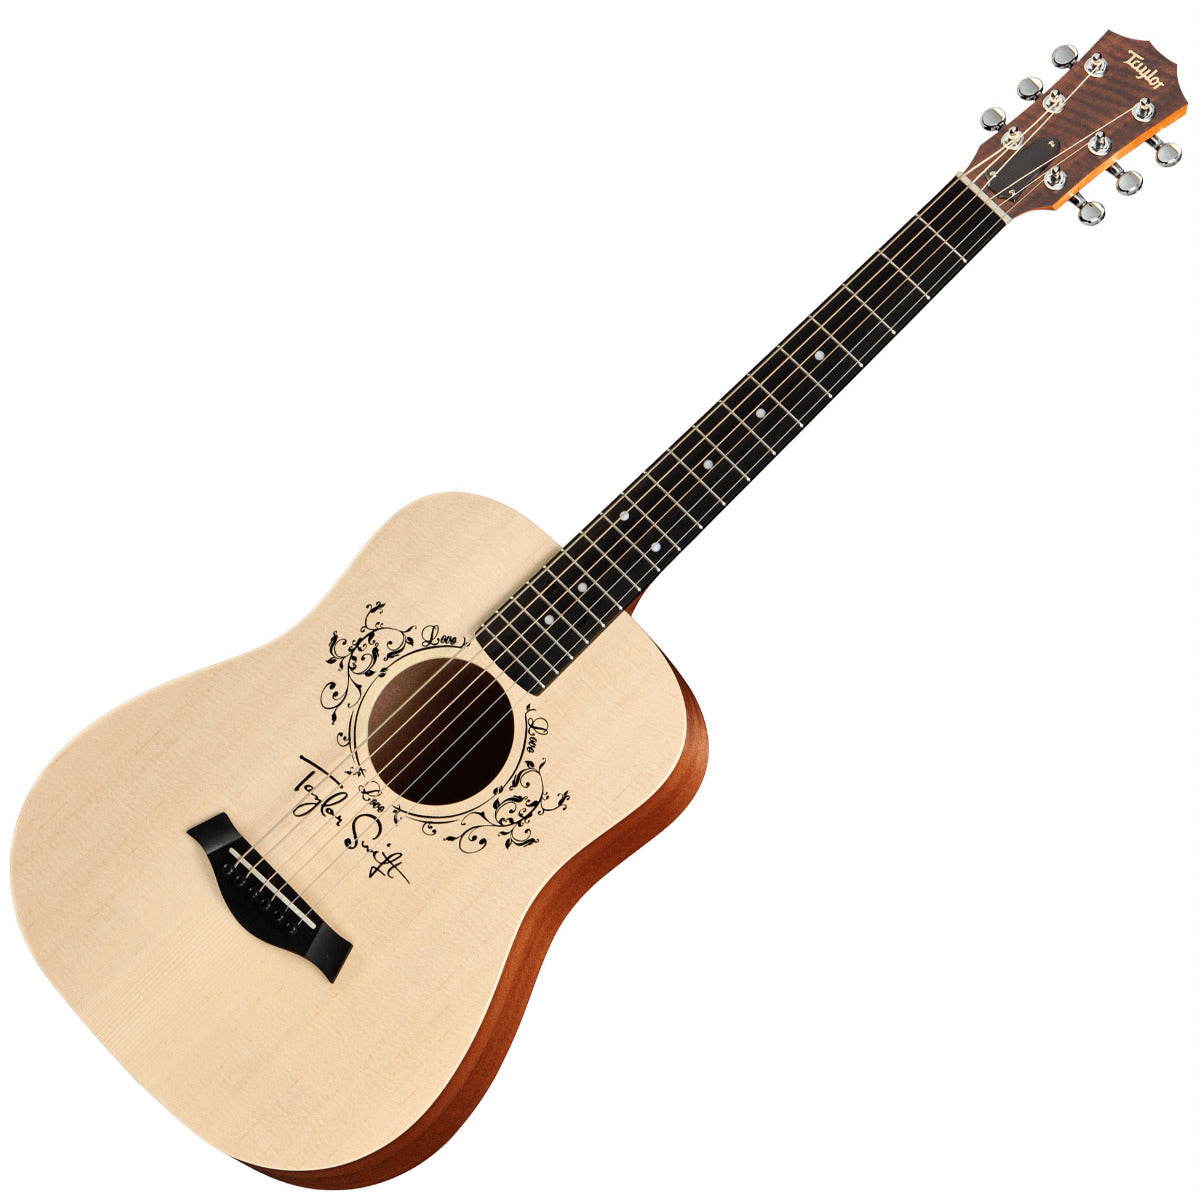 Taylor TSBT-e Taylor Swift Baby Taylor Acoustic-Electric Guitar - Natural